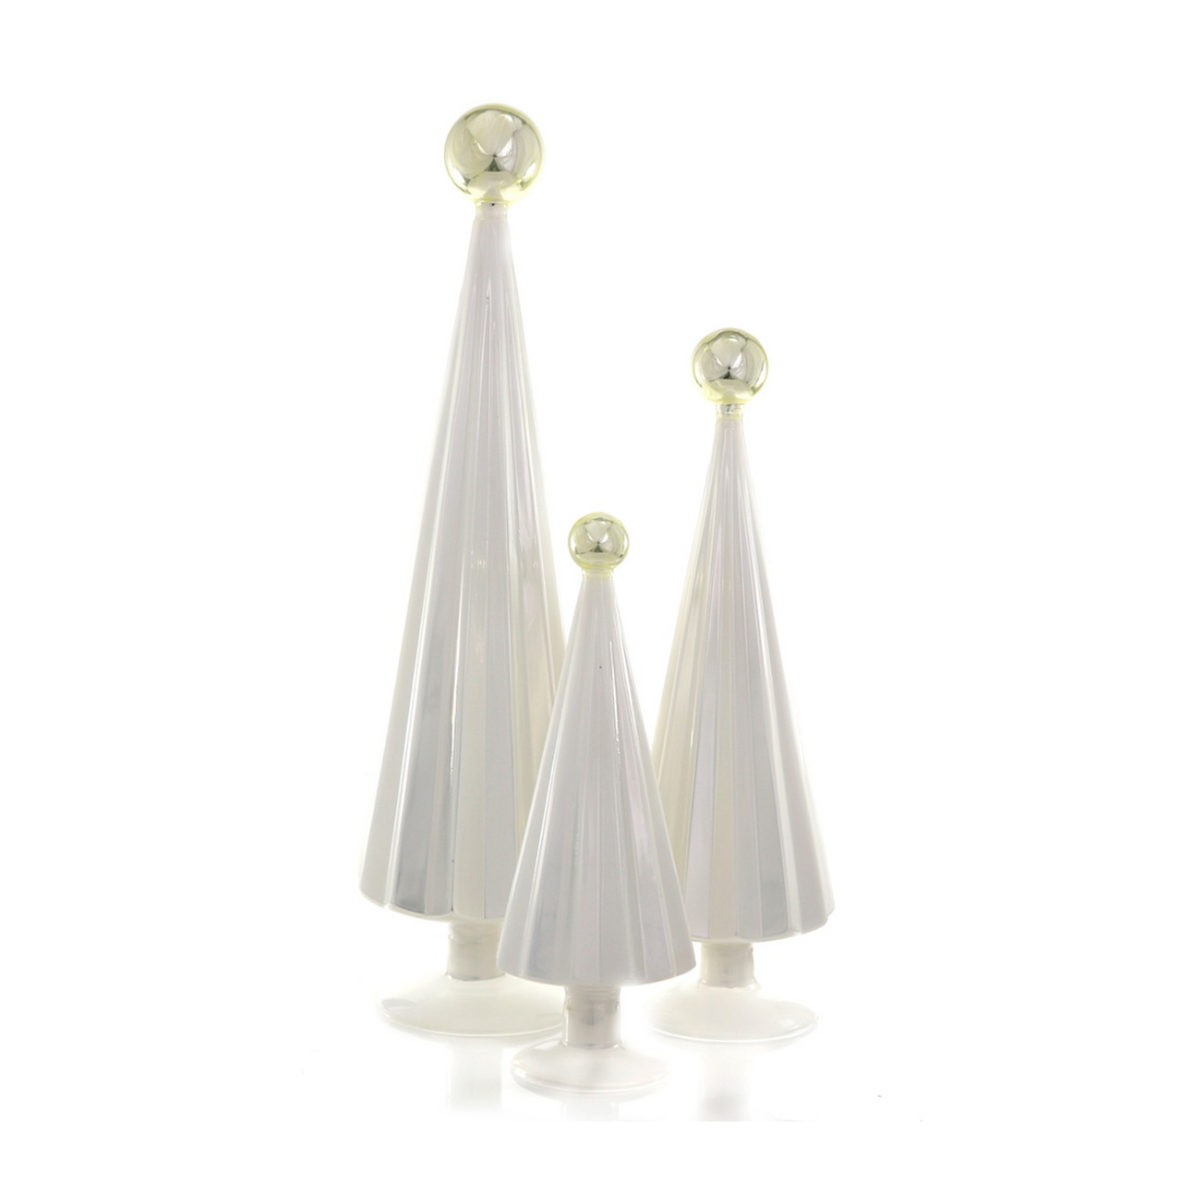 SET OF 3 PLEATED GLASS TREES IVORY/PEARL